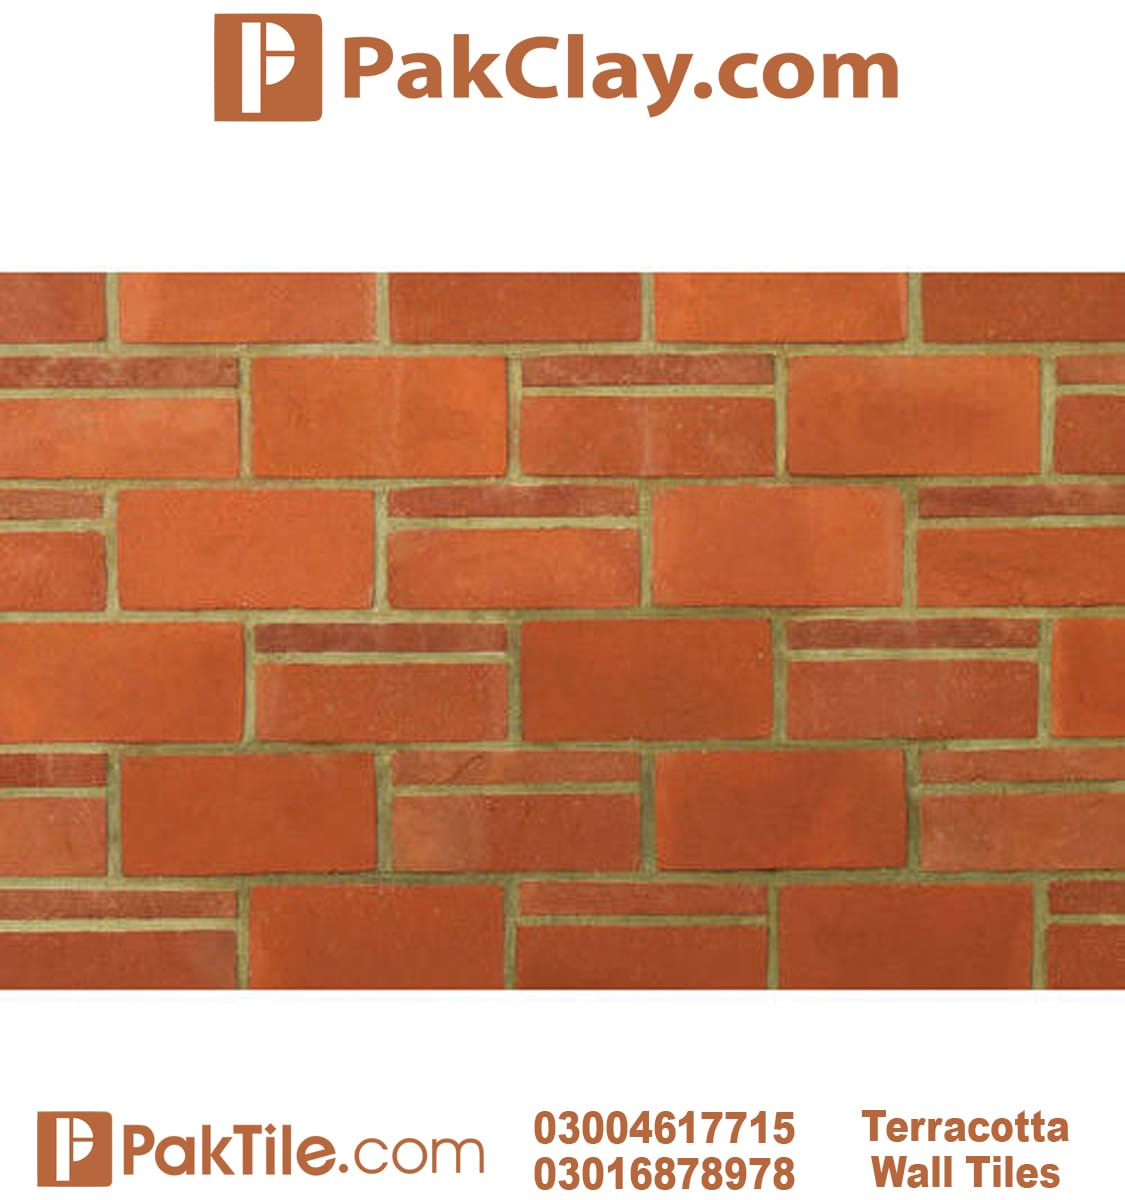 Front Face tiles price in pakistan